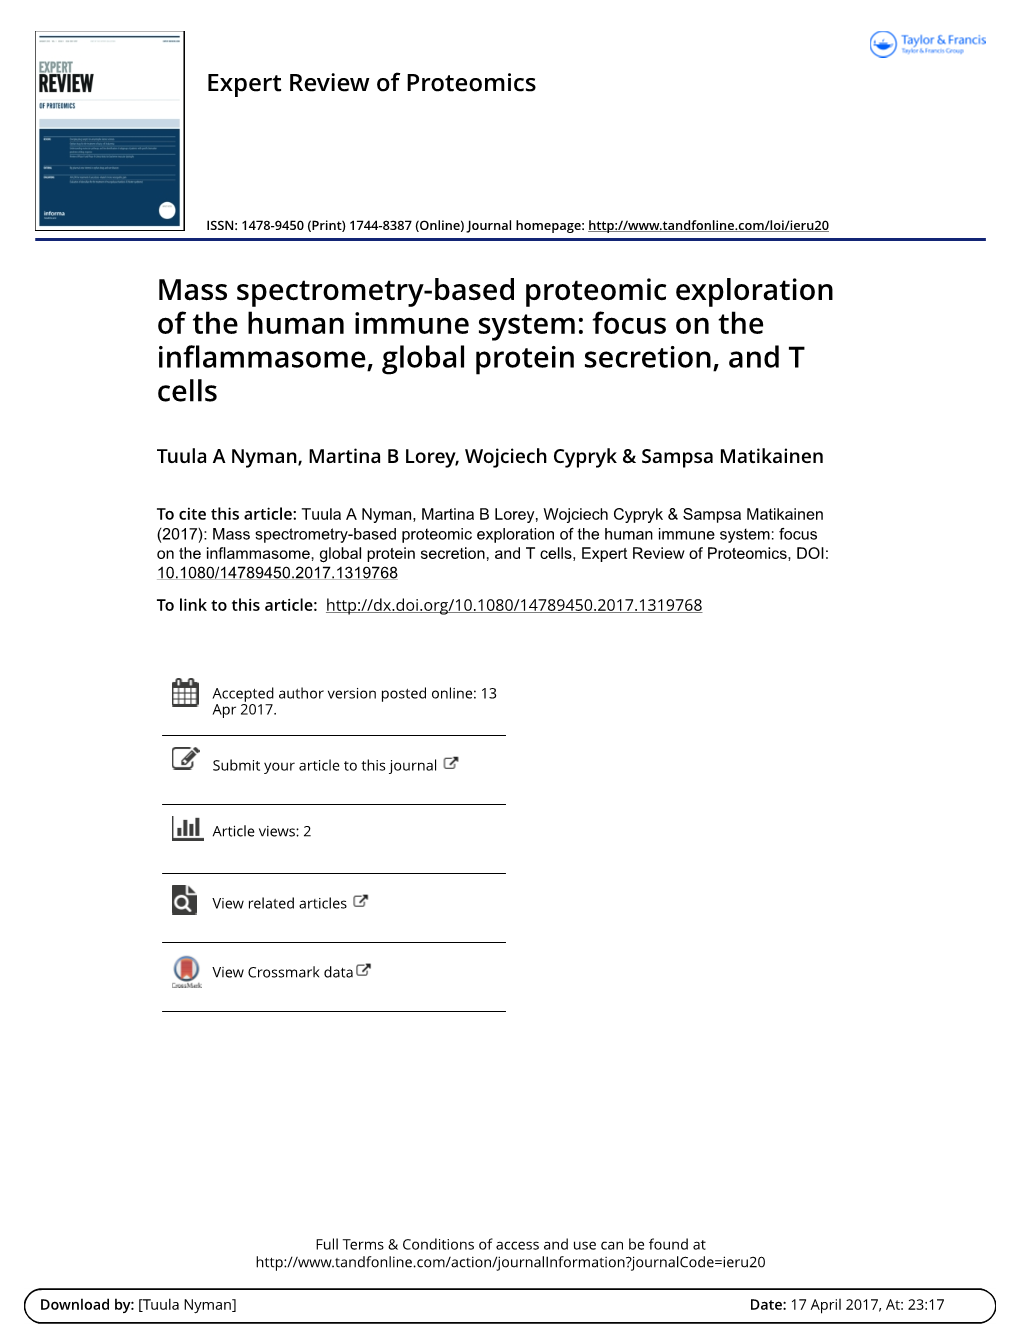 Mass Spectrometry-Based Proteomic Exploration of the Human Immune System: Focus on the Inflammasome, Global Protein Secretion, and T Cells